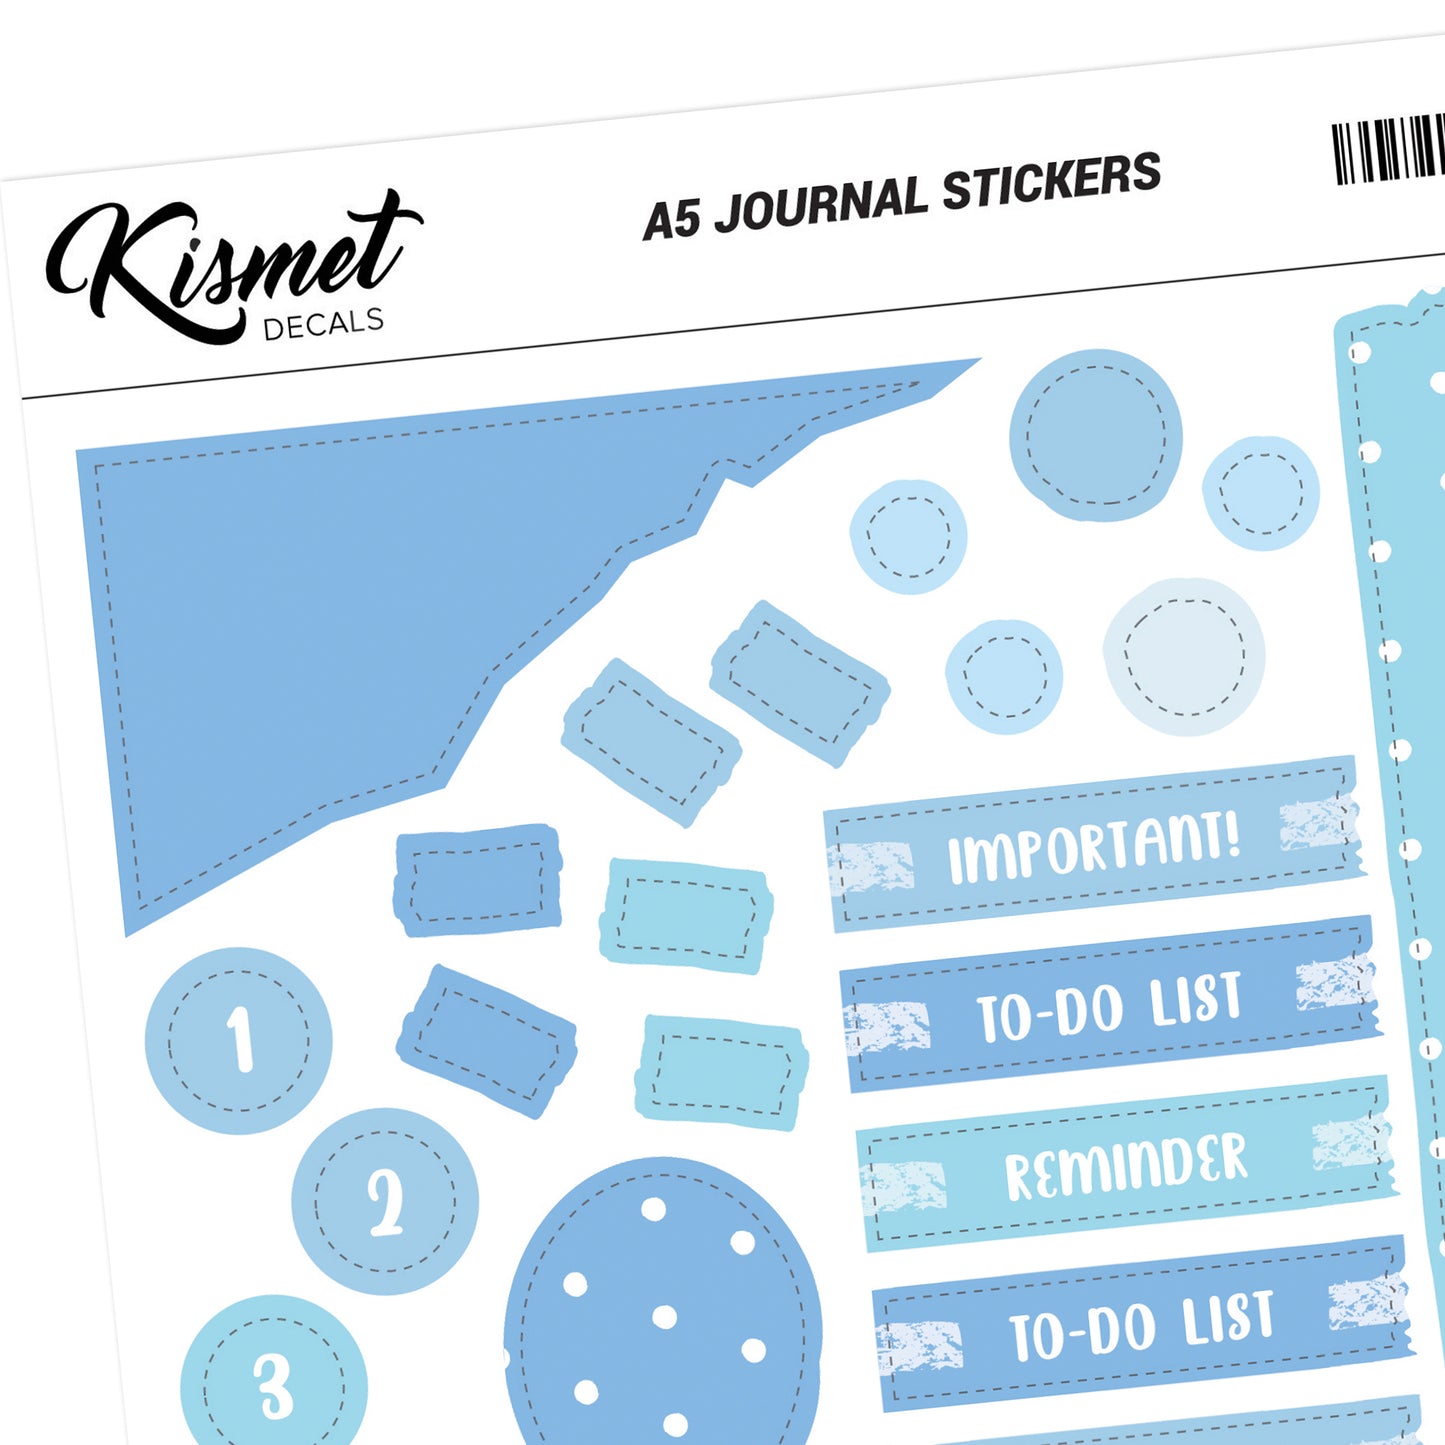 A5 Labels and Doodles Stickers - 5.3" X 8.3" - Craft Journal Snail Mail Planner Journal Diary Paper Sticker Sheet